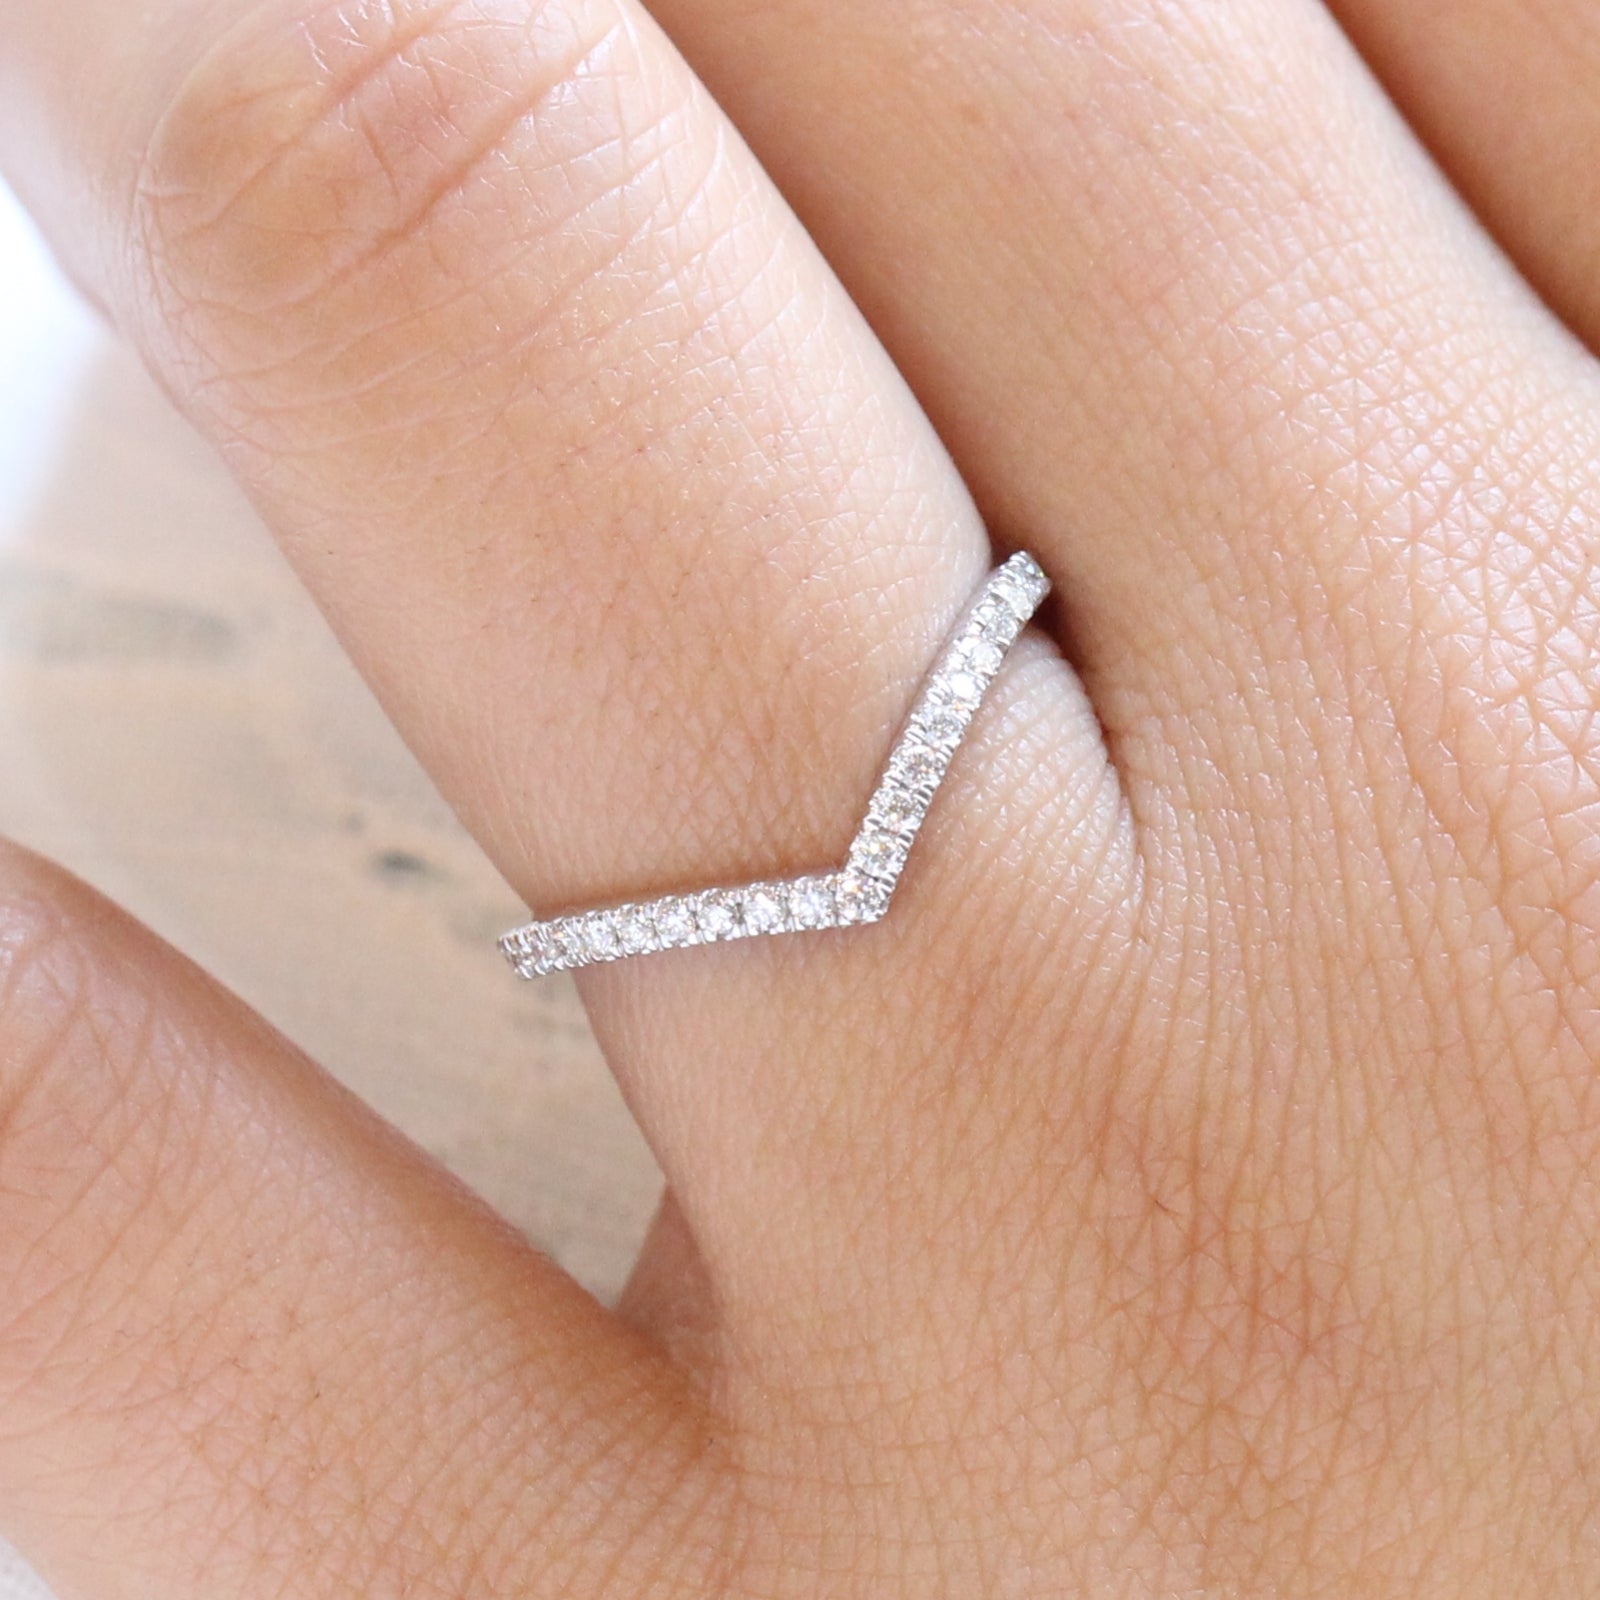 Chevron Diamond Wedding Ring White Gold Curved Band by la more design jewelry